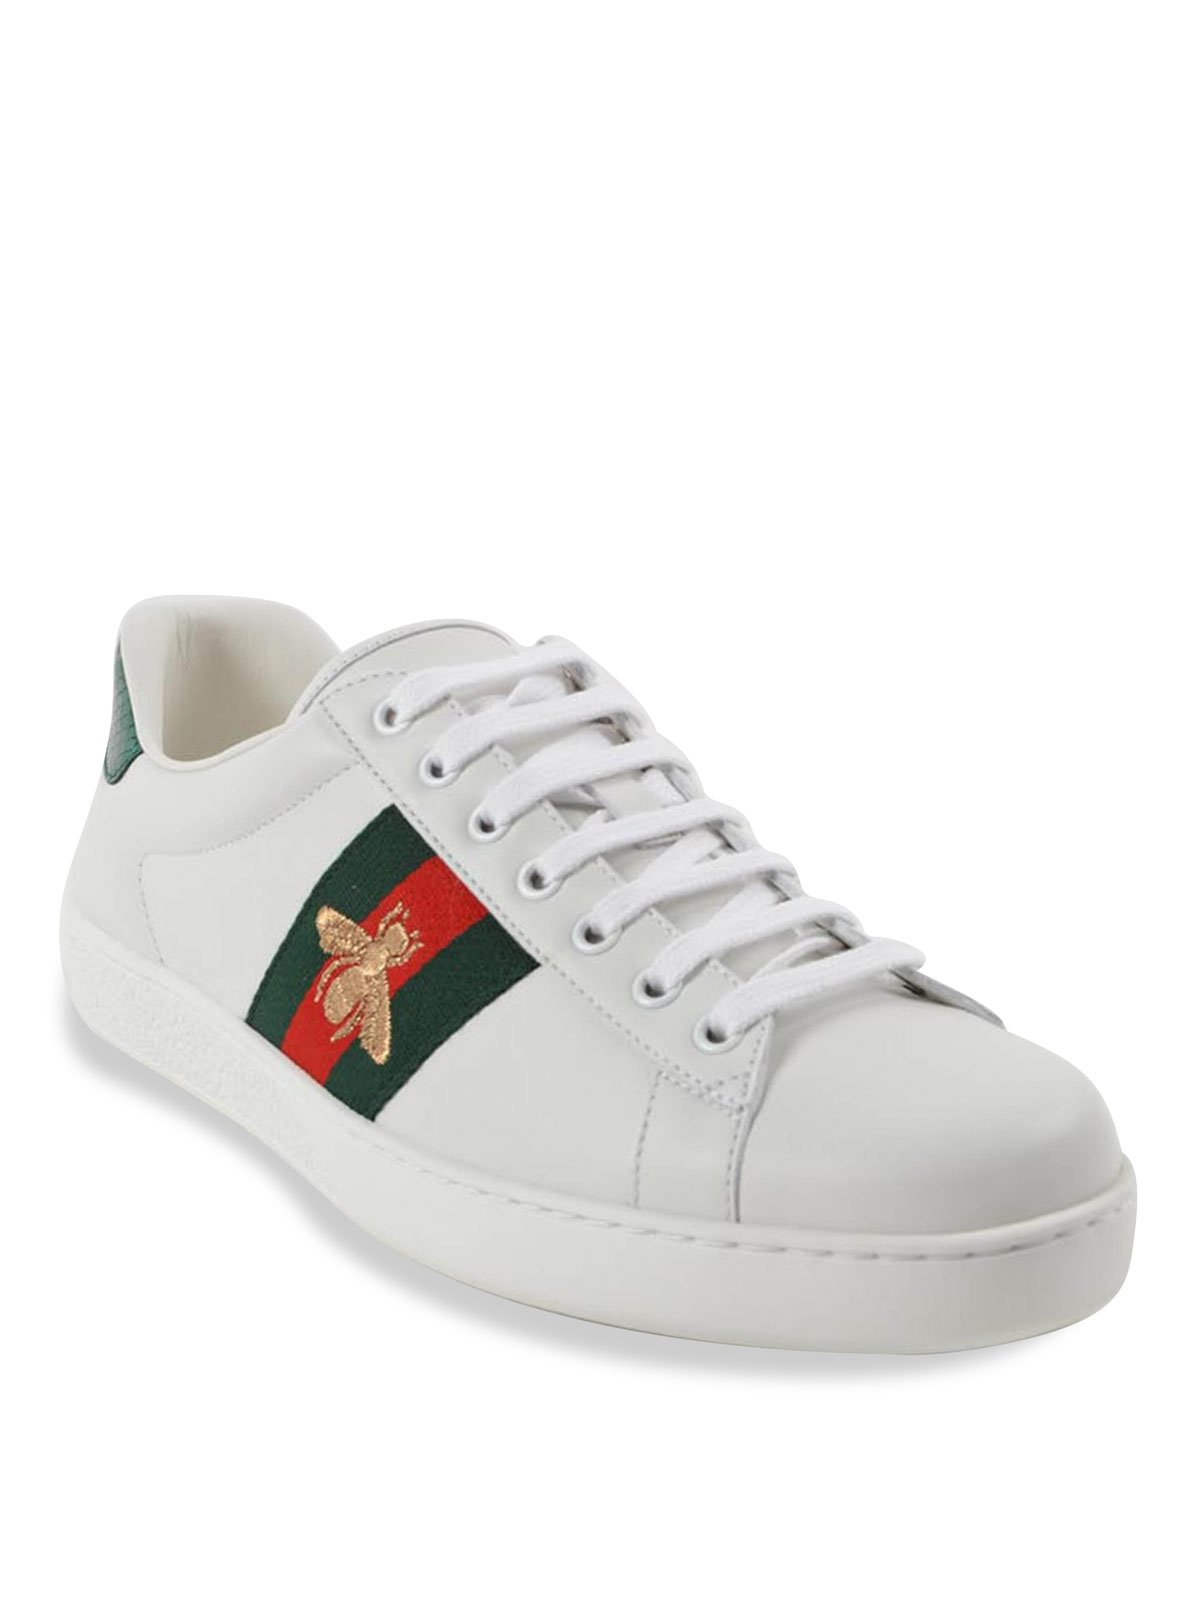 Gucci Bee Sneakers Sale | Literacy Ontario Central South